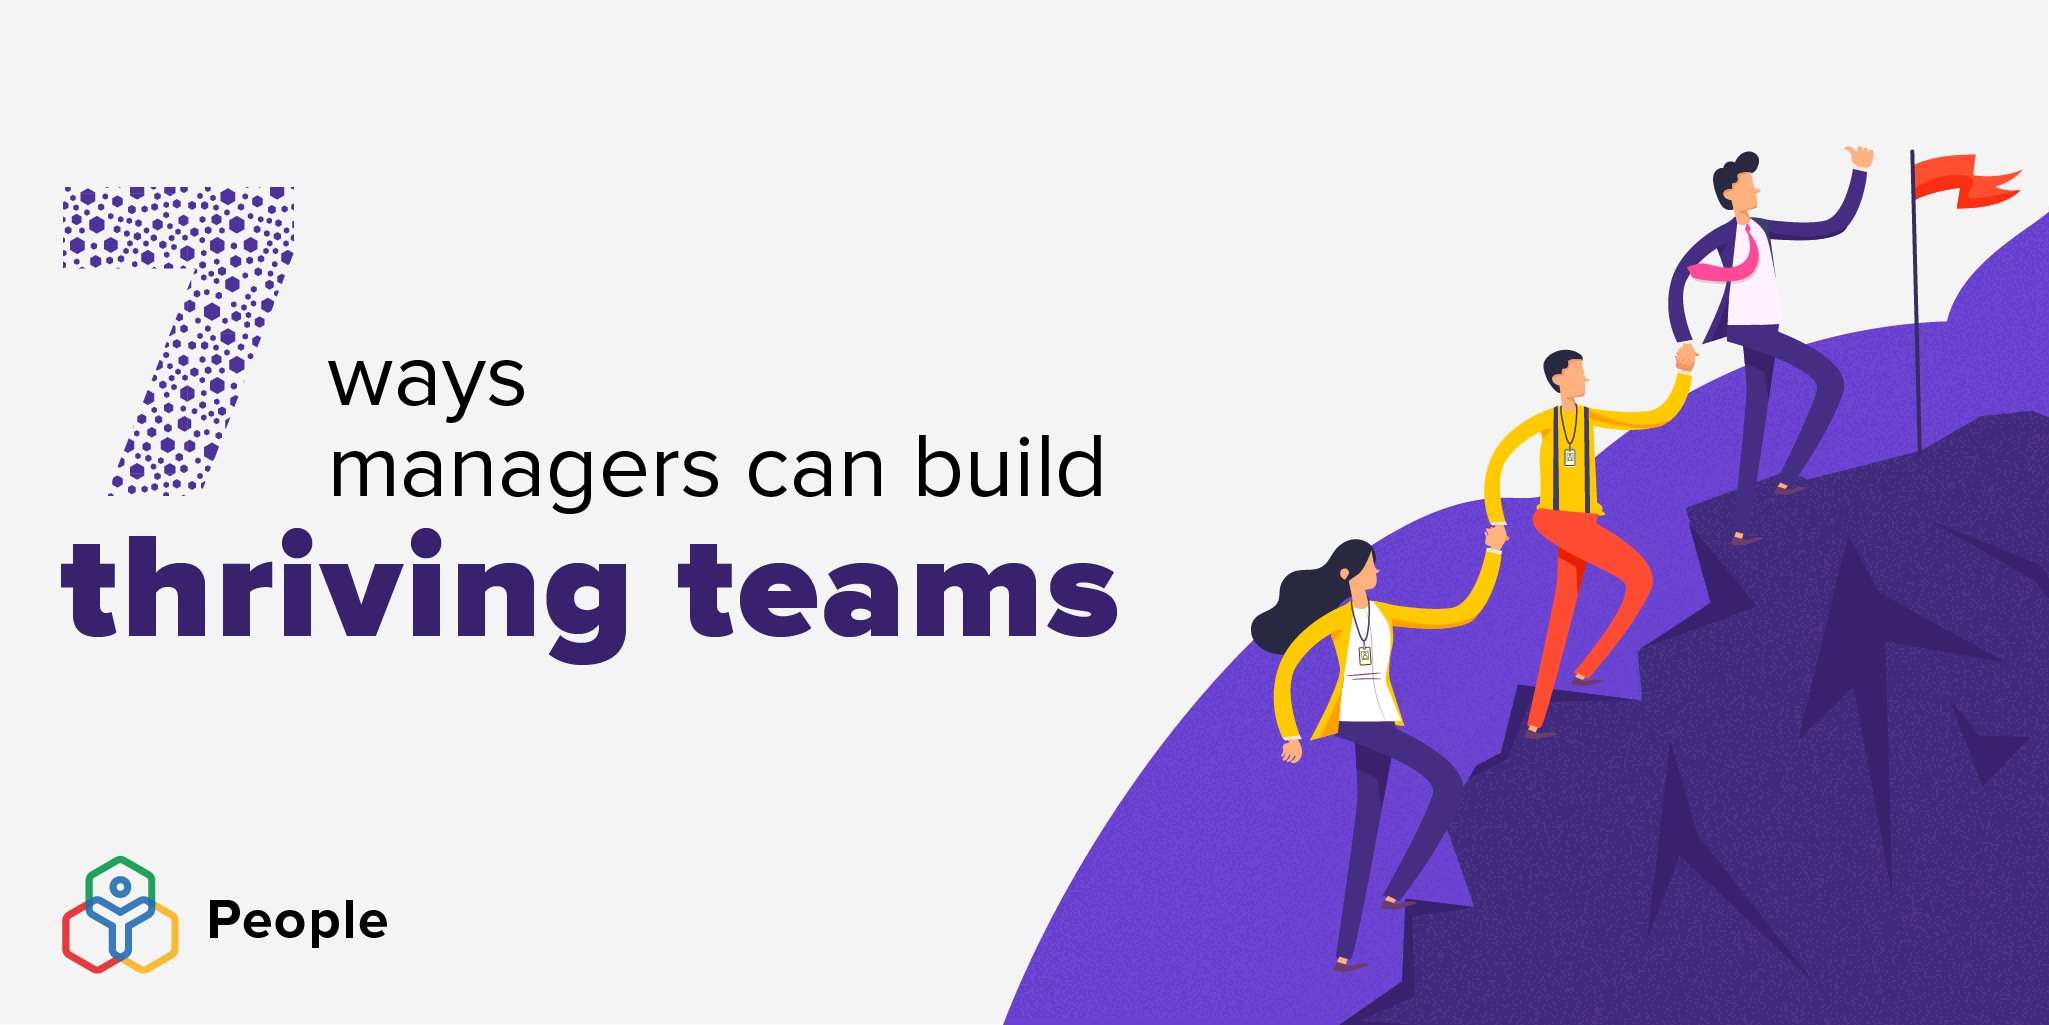 A manager's guide to improving retention and building engaged teams